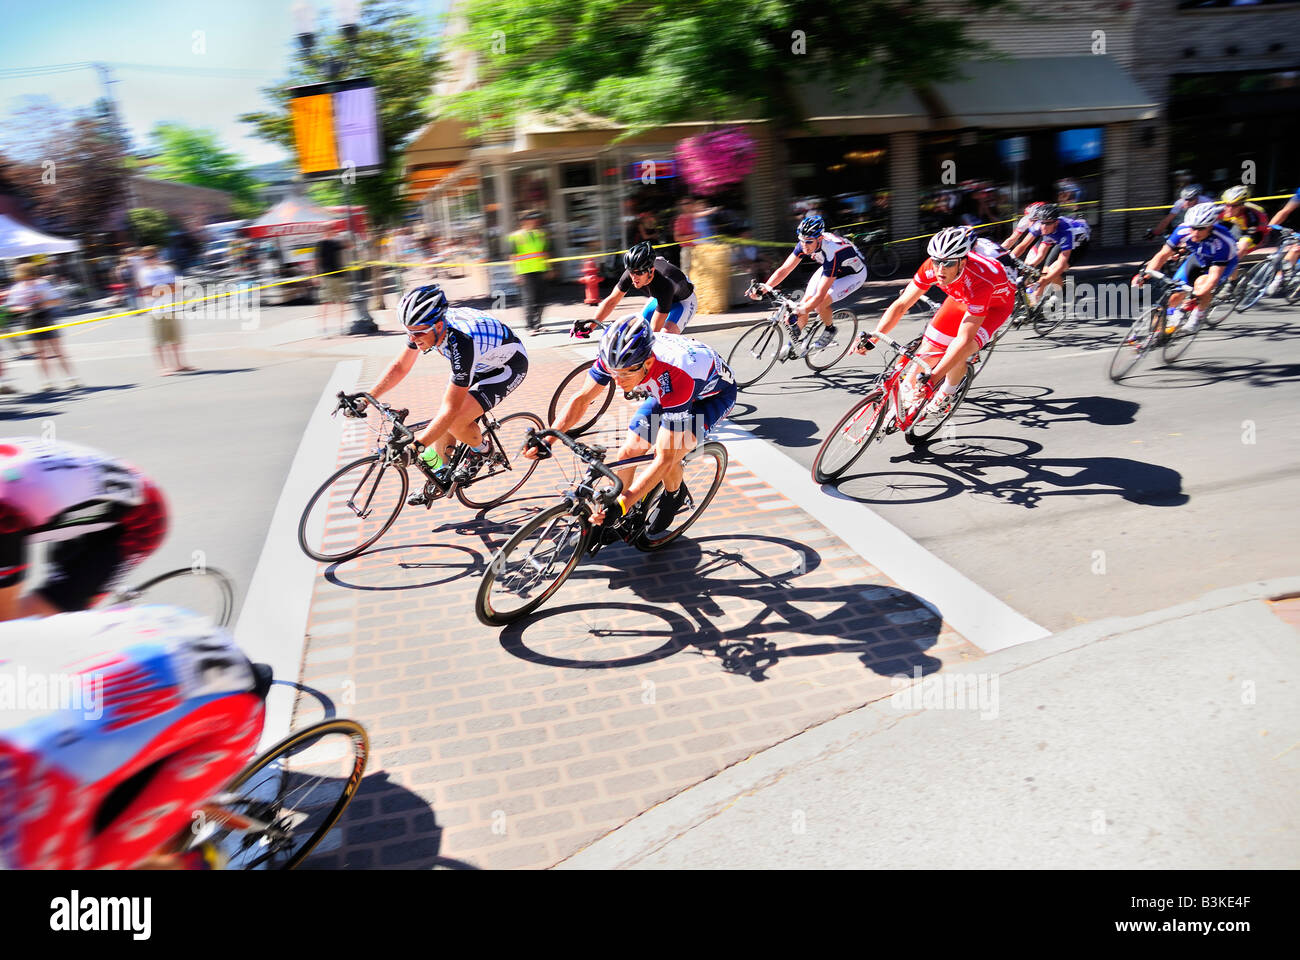 Downtown Criterium of the Cascade Classic Cycling Race Stock Photo